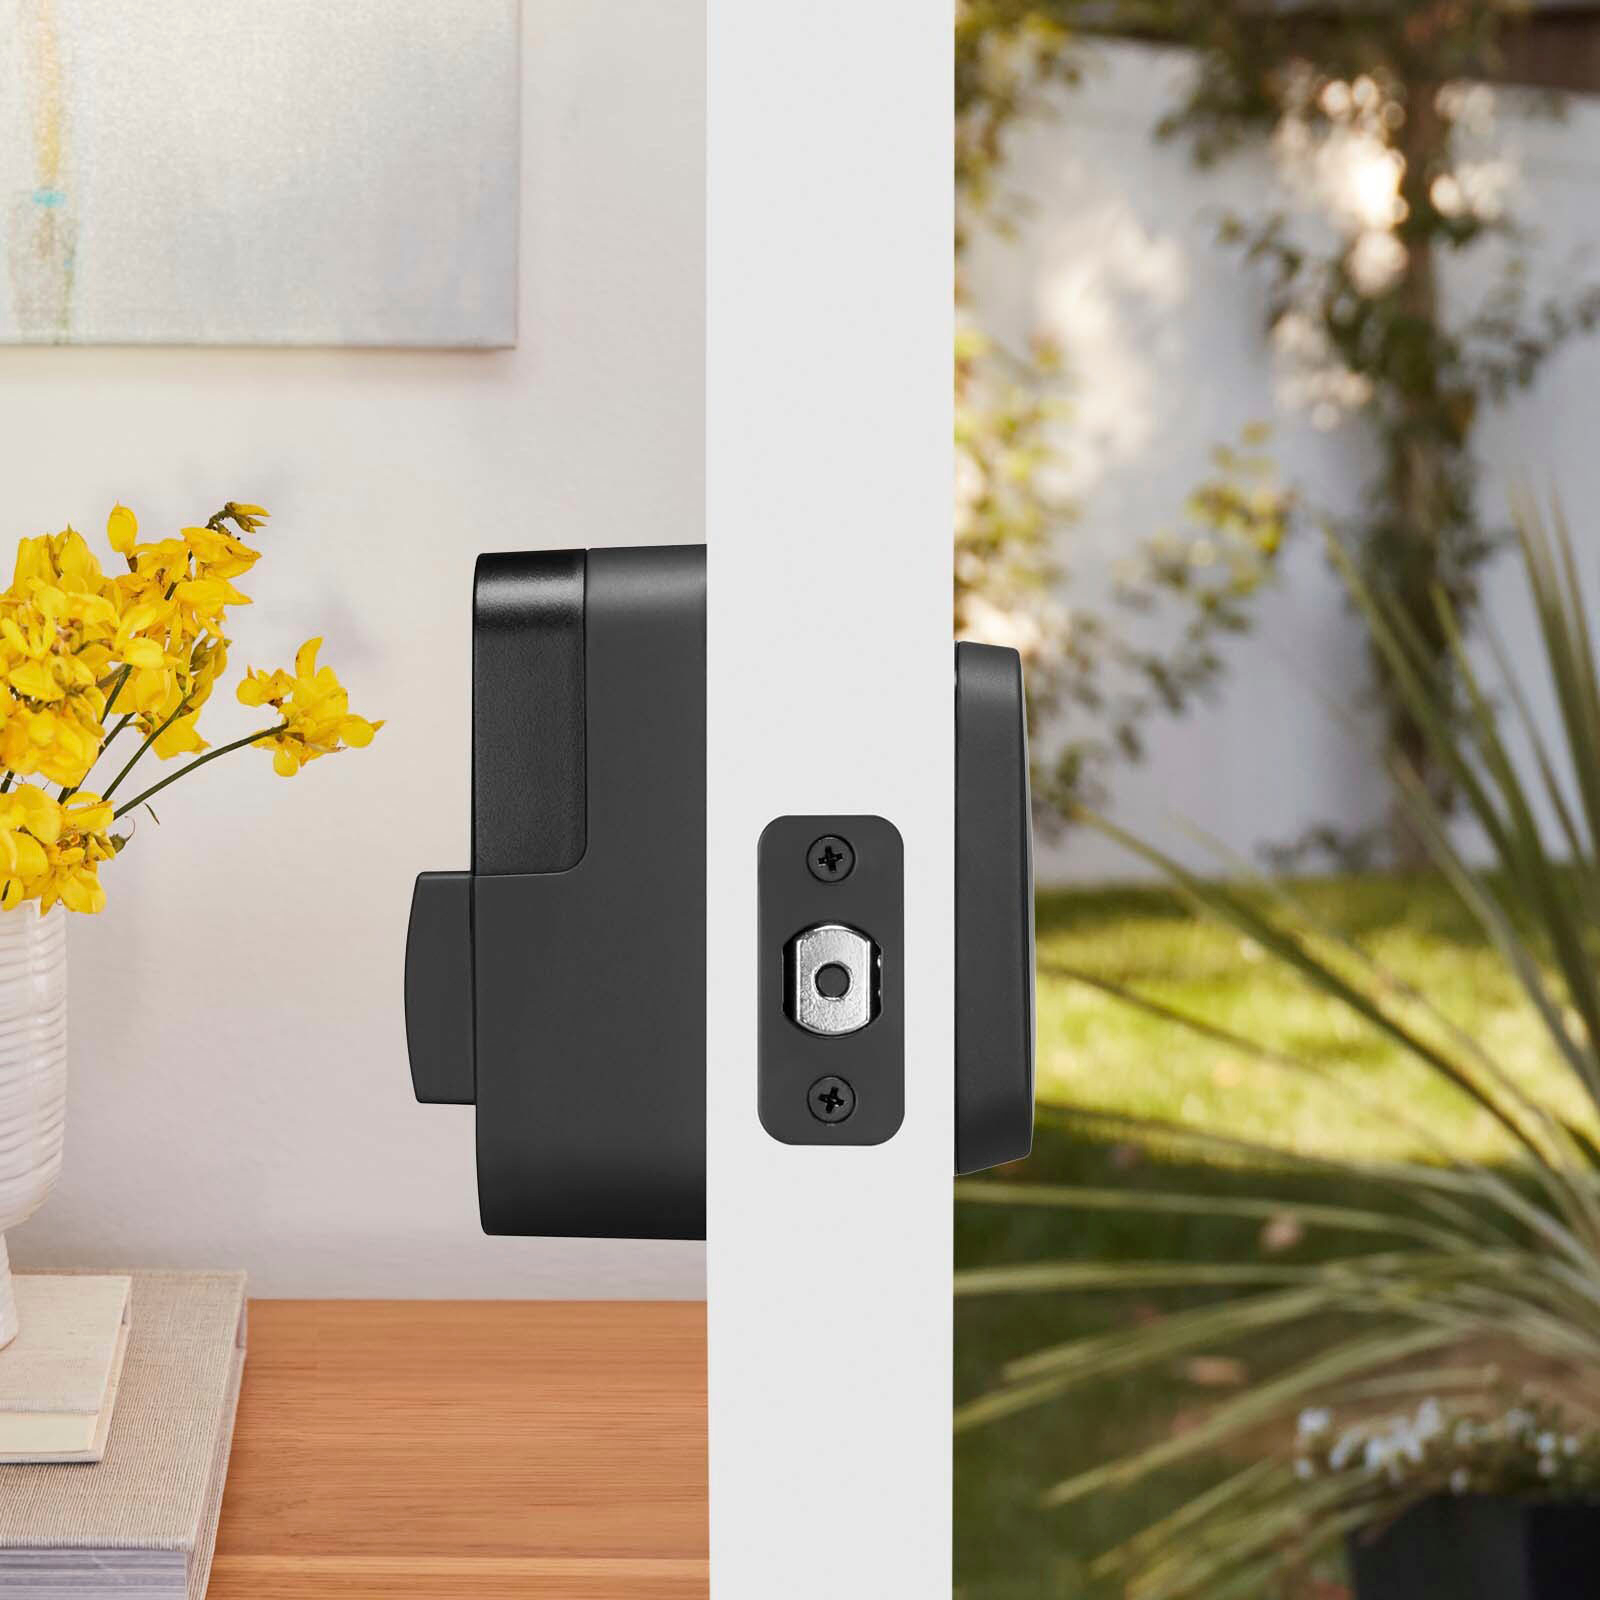 Angle View: Yale - Assure Lock 2, Key-Free Pushbutton Lock with Wi-Fi - Black Suede